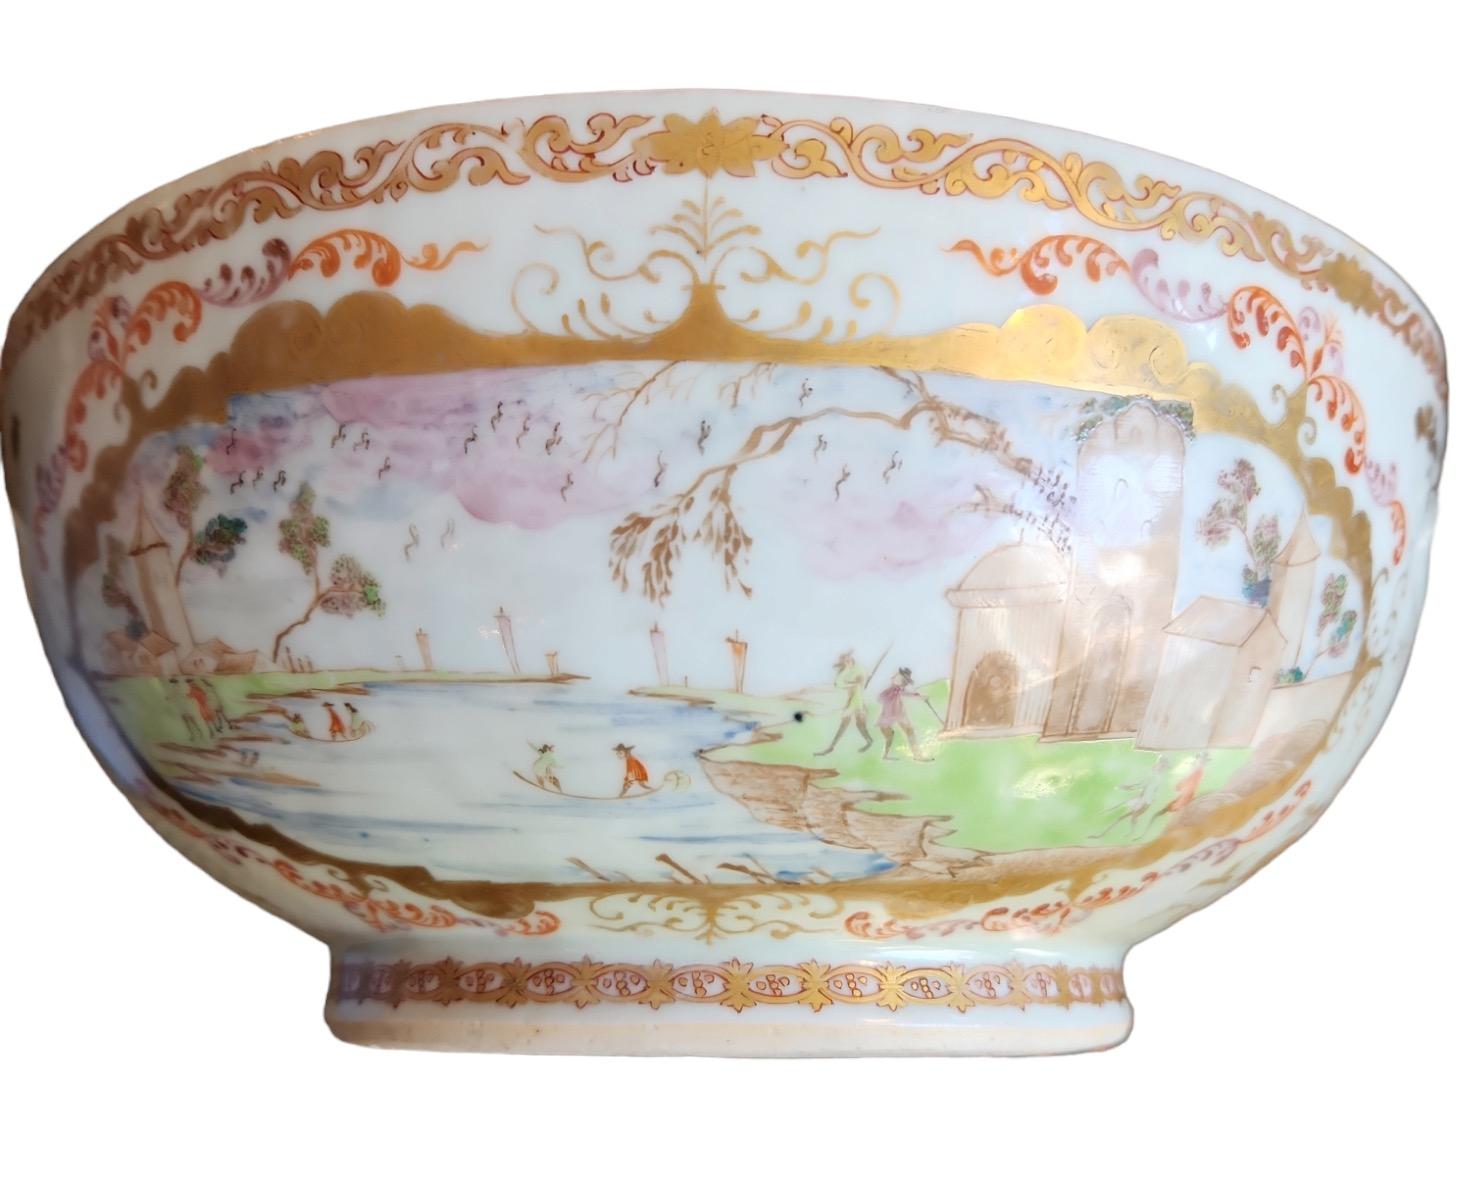 Rare Chinese Export Porcelain Covered Tureen For Sale 3